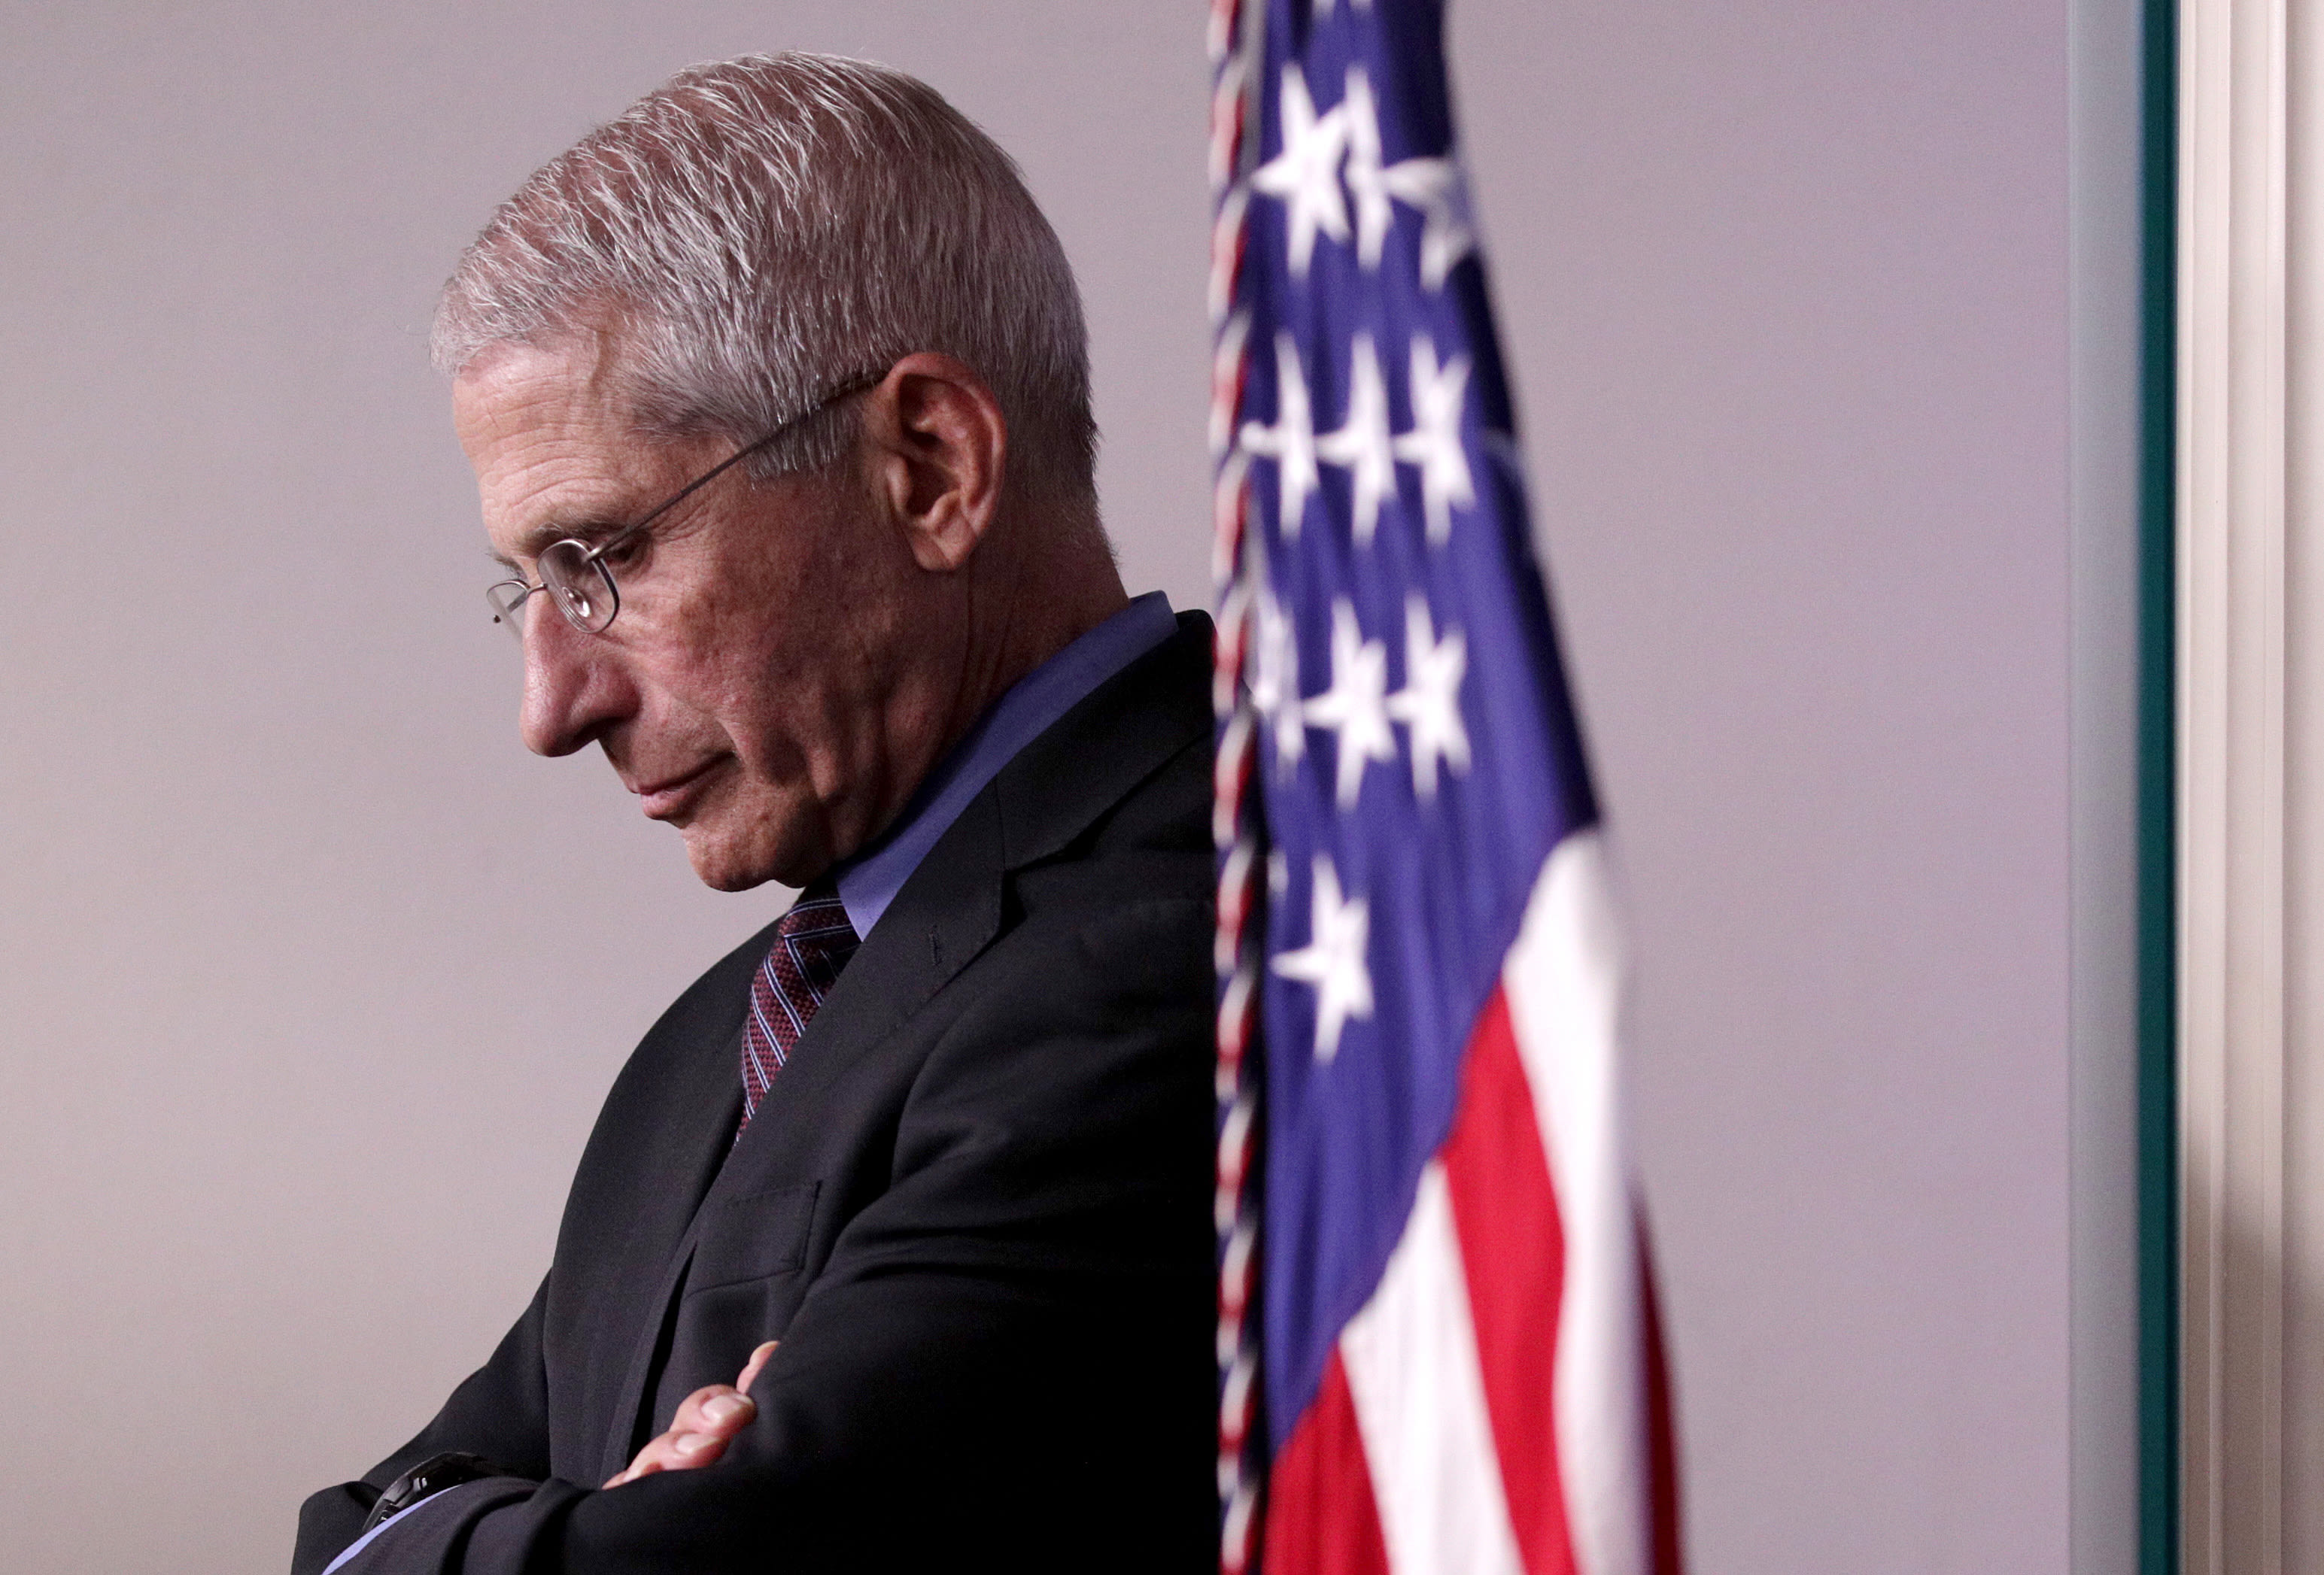 Fauci holds up New York as model for fighting coronavirus — 'They did it correctly'